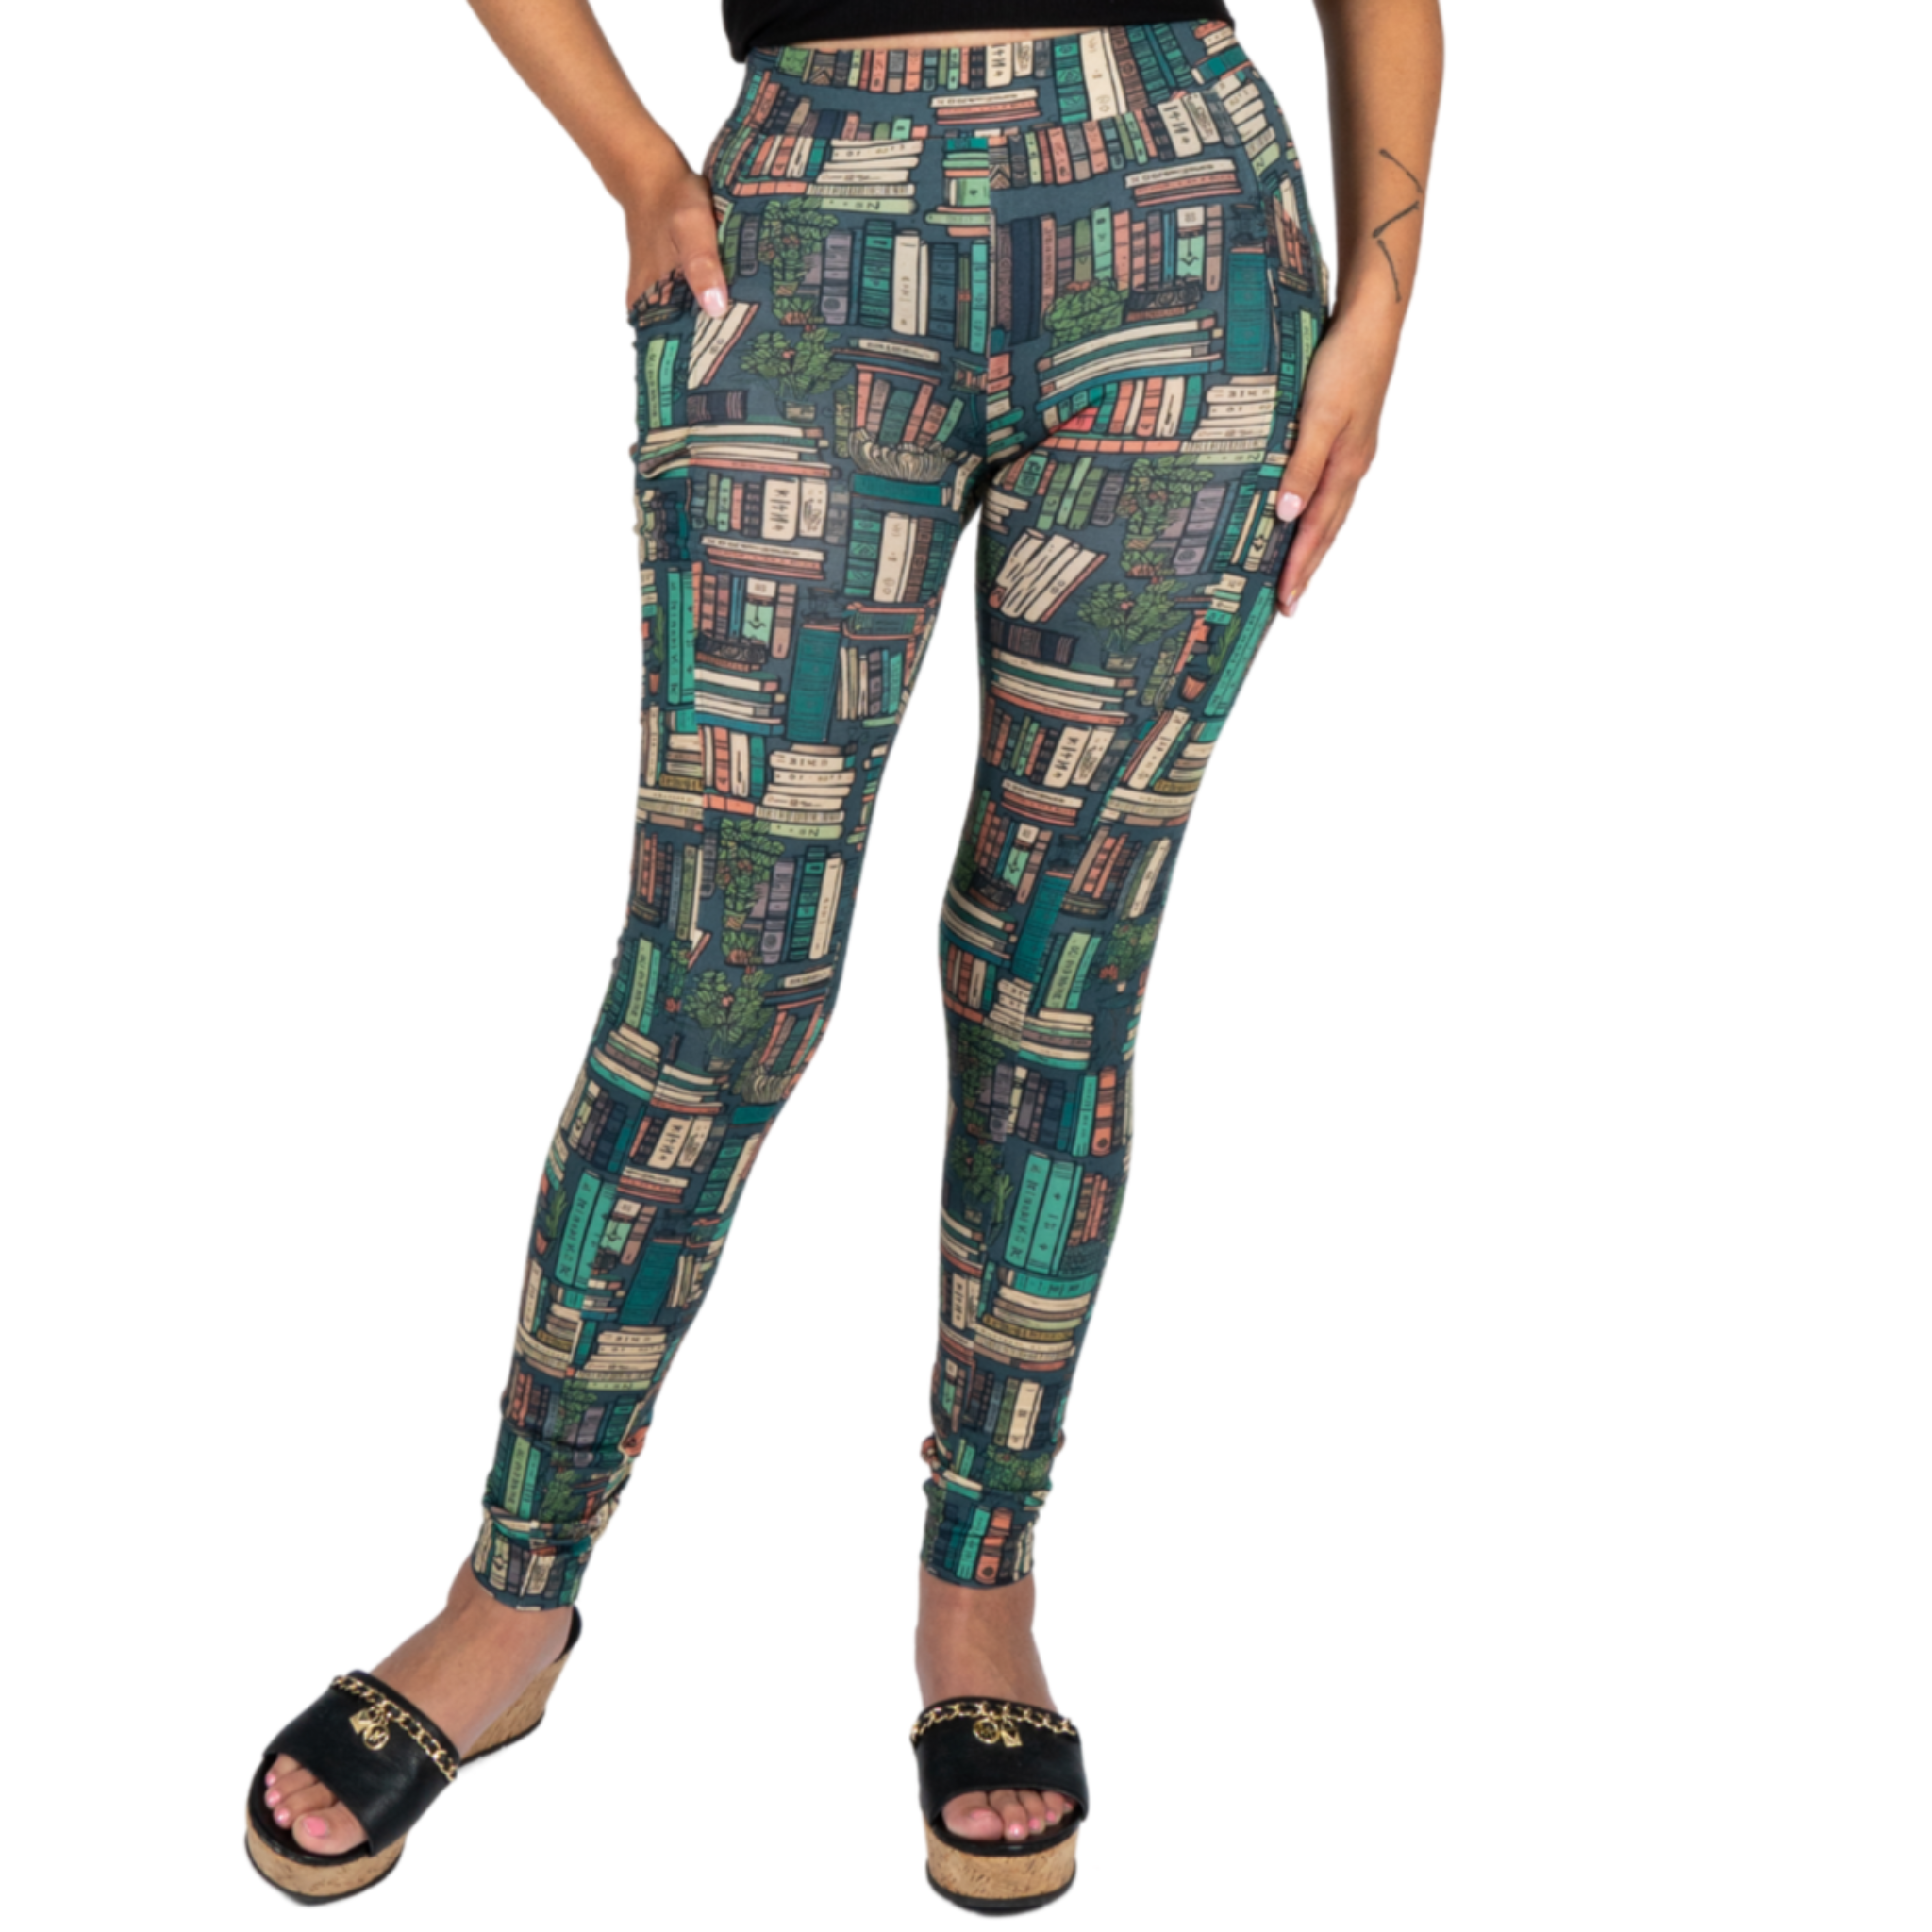 Botanical Library Adults Leggings with Pockets